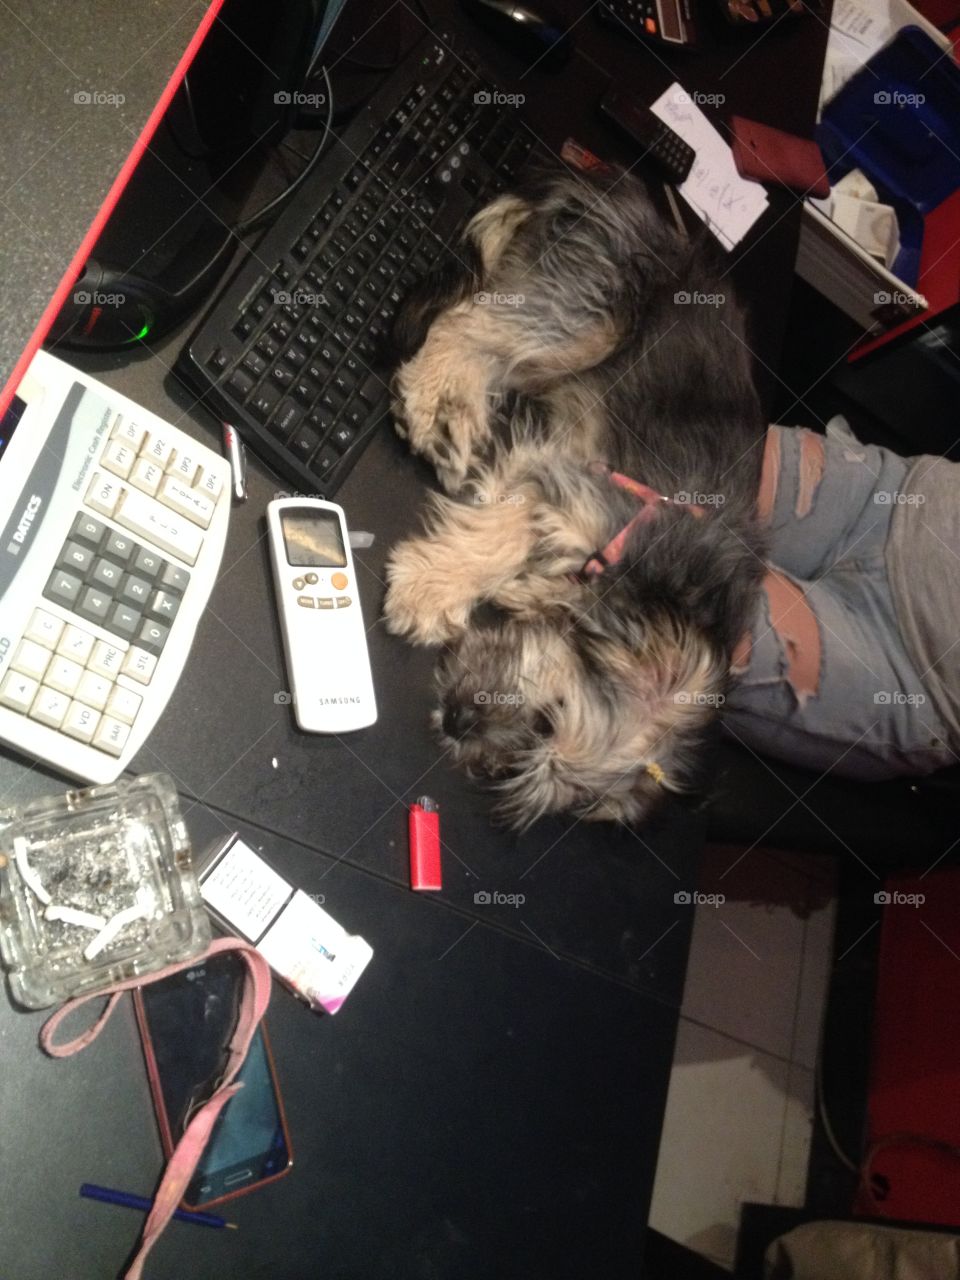 My desk above. Dog is resting on the desk where she works